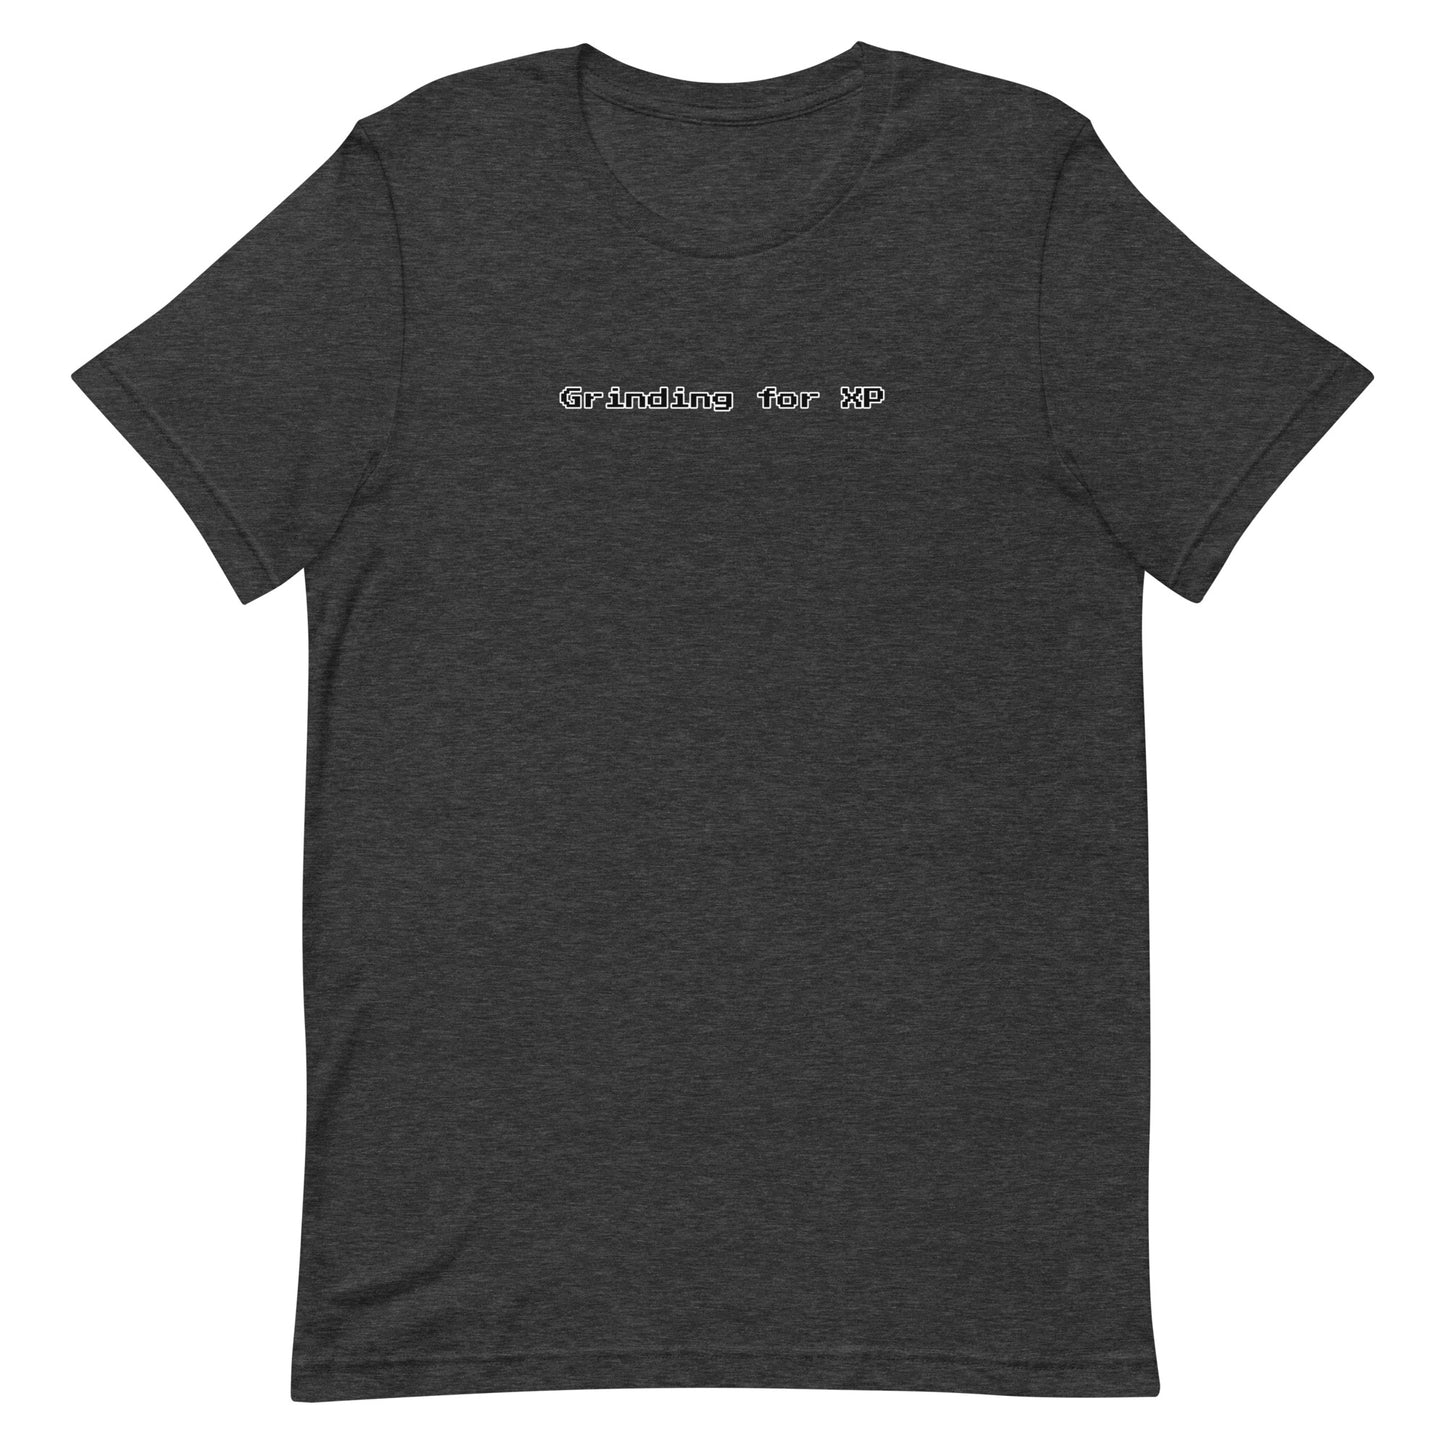 Grinding for XP - T-Shirt (B) - Heathered, color blends